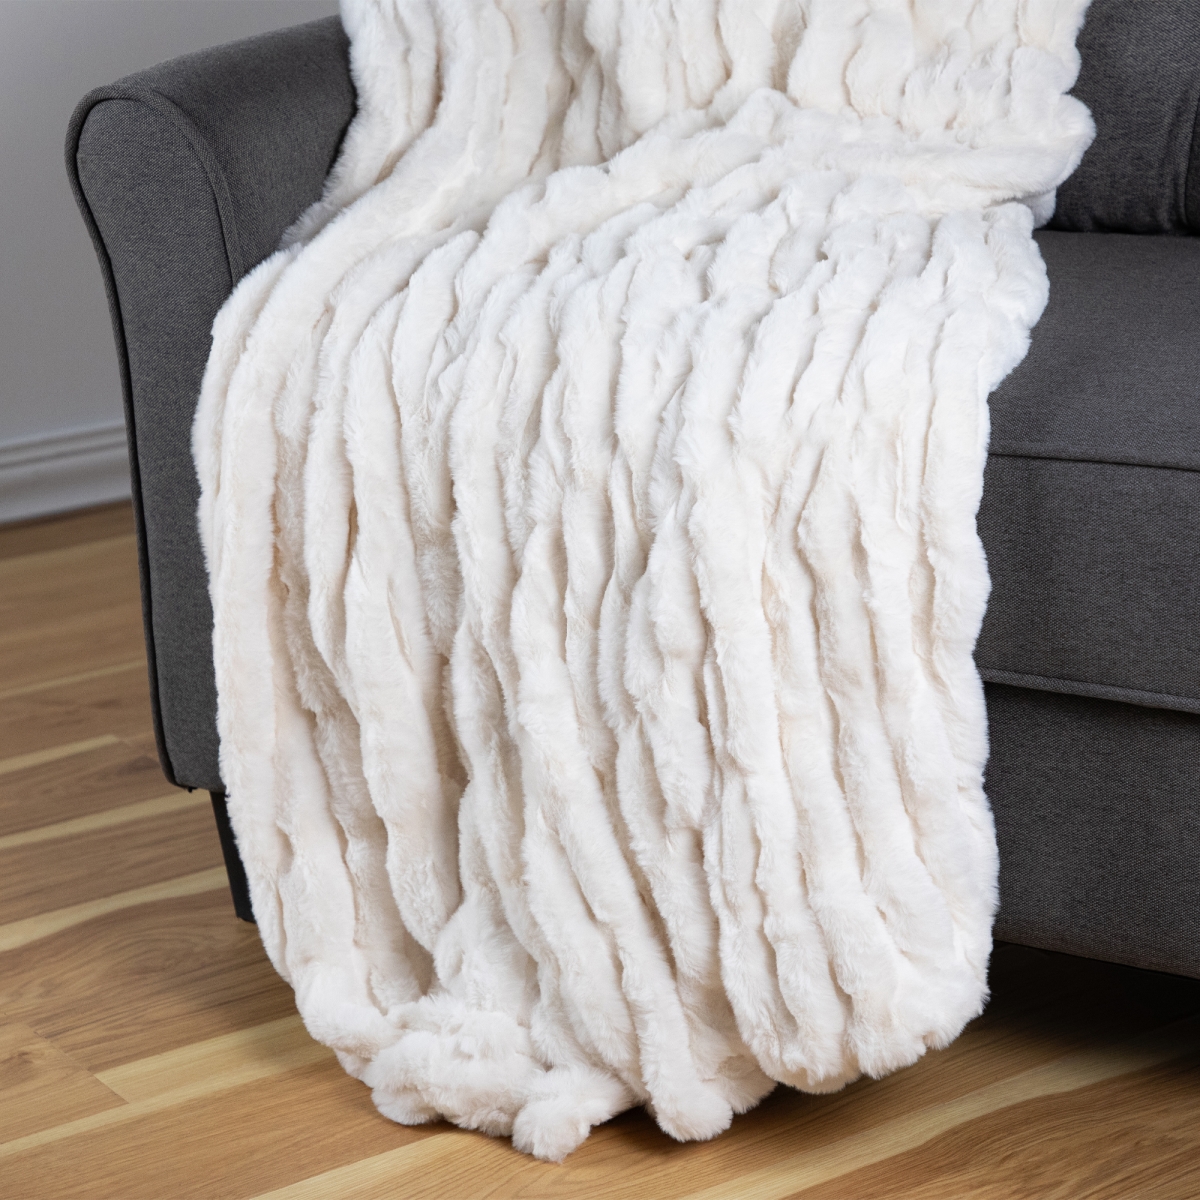 Picture of Northlight 35702149 50 x 60 in. Plush White Fluffy Thick Throw Blanket